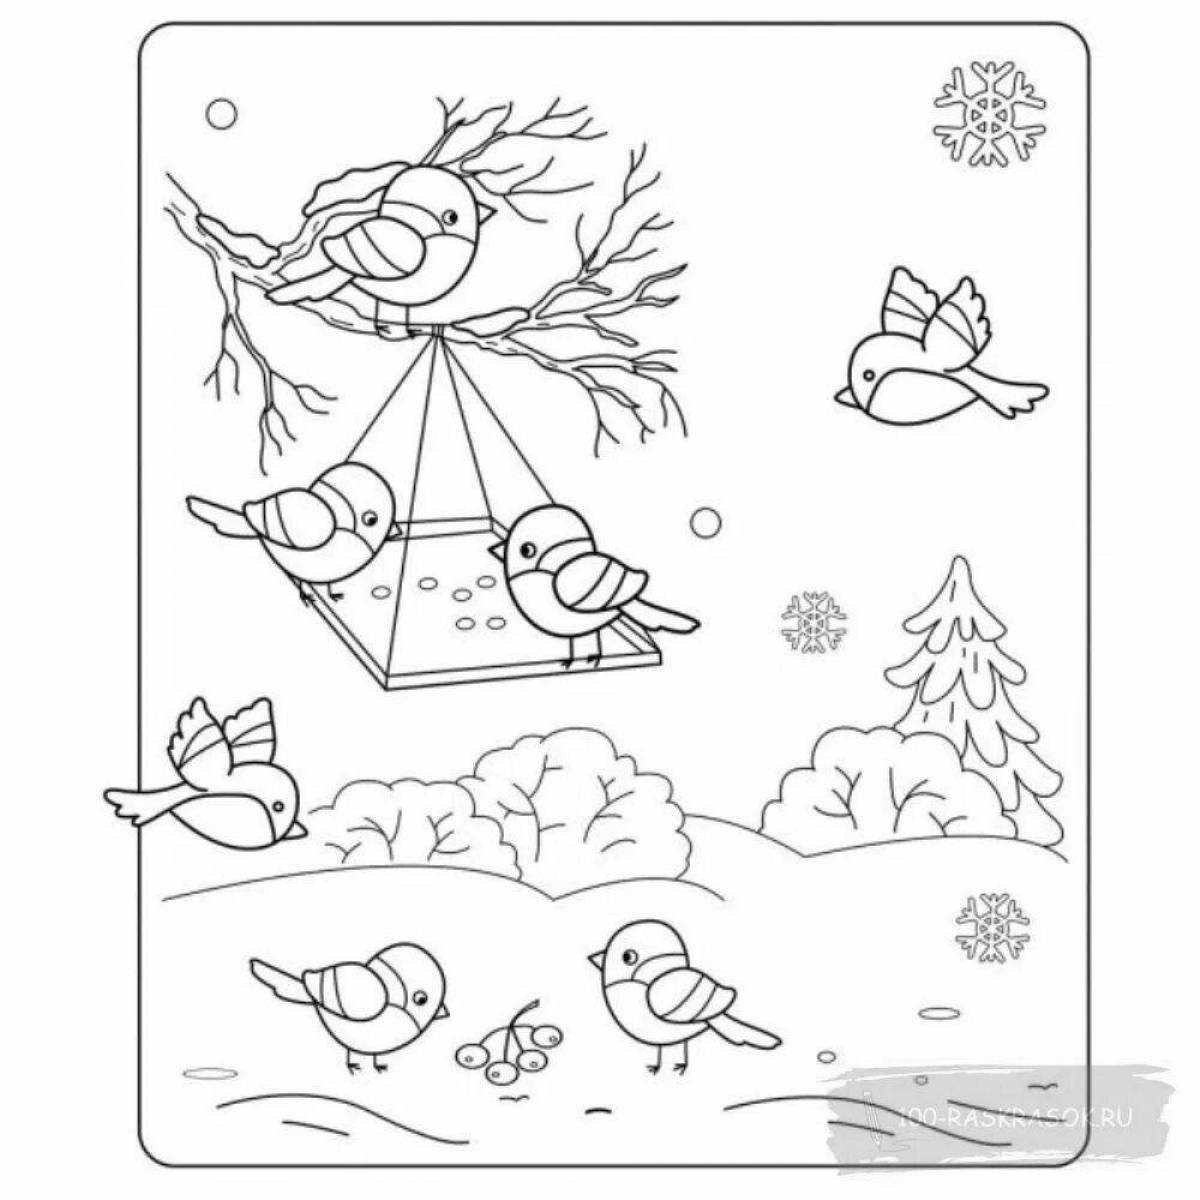 Coloring book stormy winter in the forest